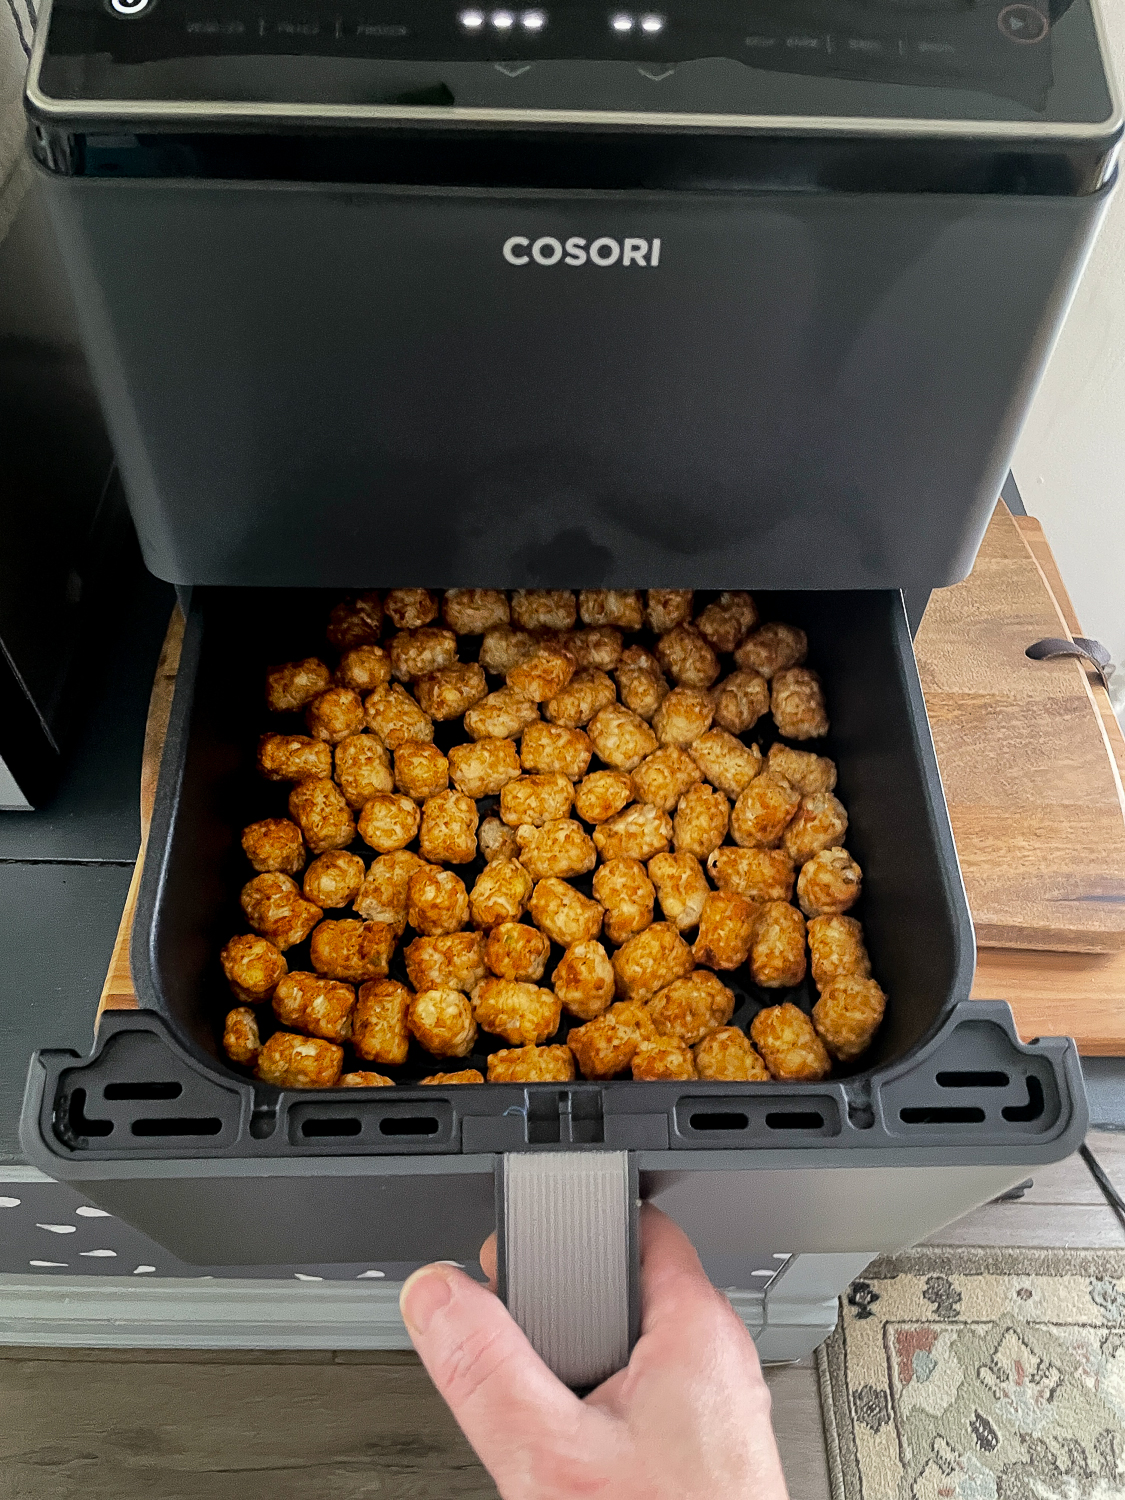 Ore Ida Tater Tots in the basket of a Cosori air fryer after being air fried and ready to serve - they are a beautiful golden brown